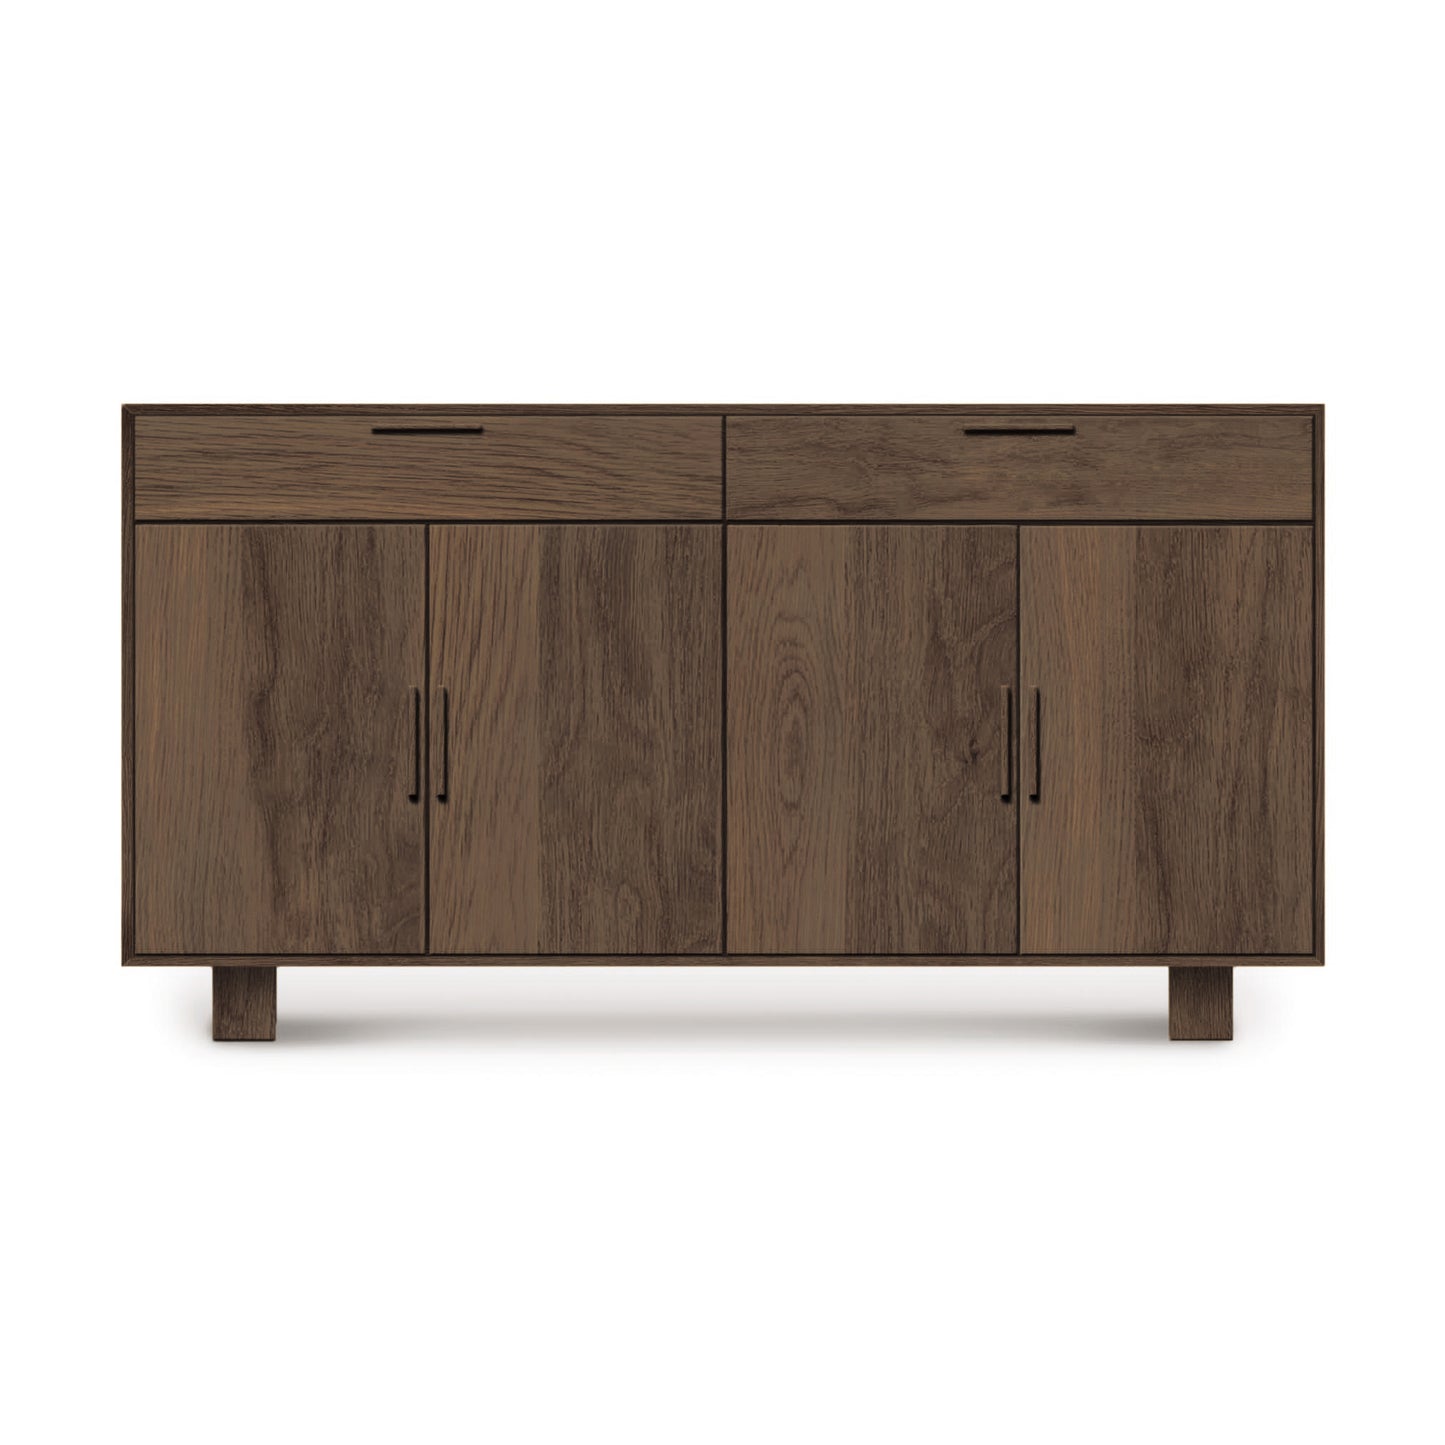 An Iso 4 Door, 2 Drawer Buffet from Copeland Furniture, solid oak wood sideboard with sliding doors and a flat top, isolated against a white background.